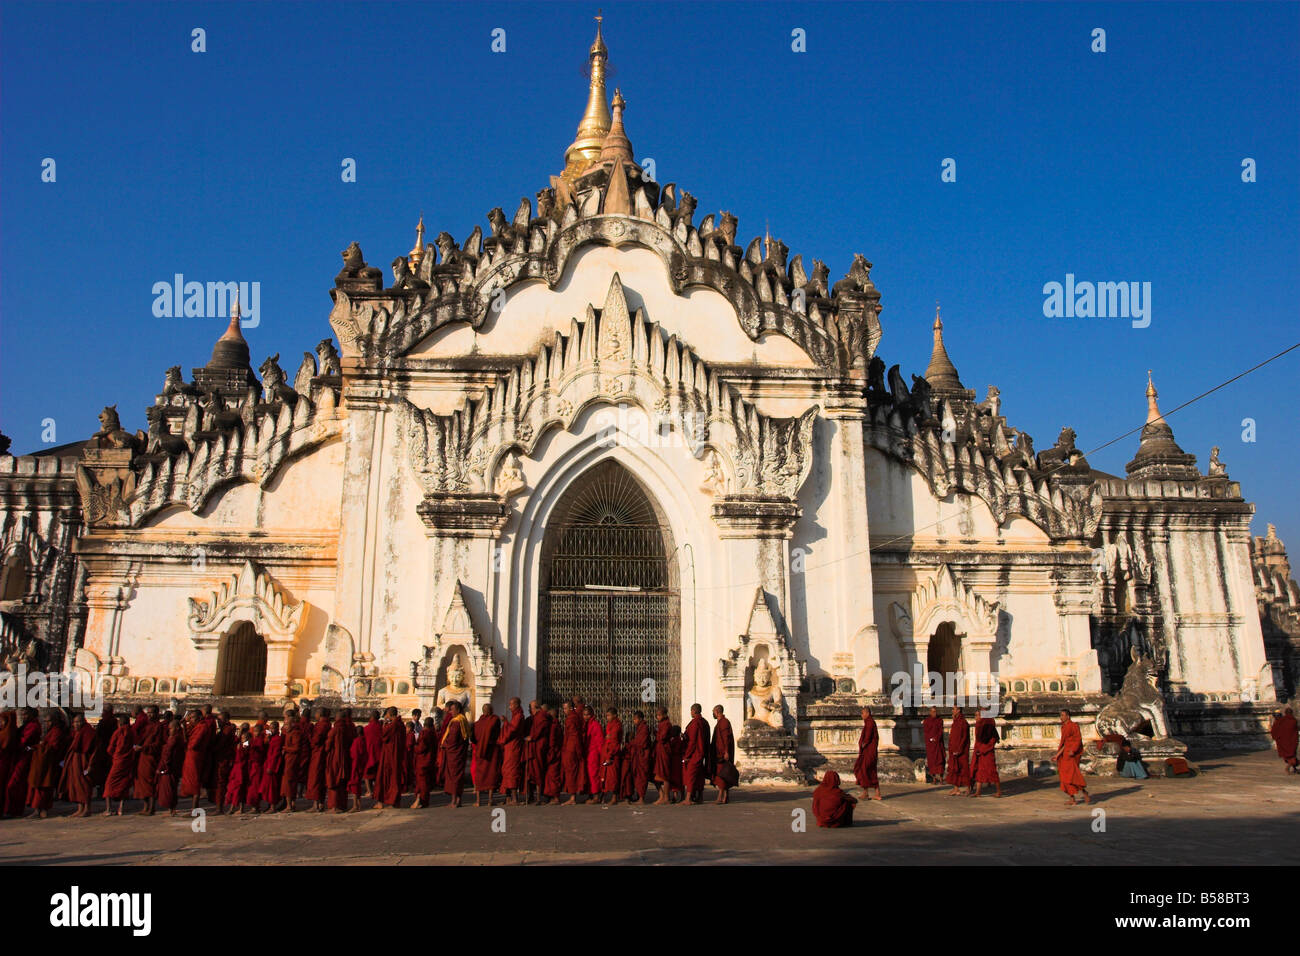 Monks waitng in a long line to collect alms, Ananda festival,  Ananda Pahto (Temple), Old Bagan, Bagan (Pagan), Myanmar (Burma) Stock Photo